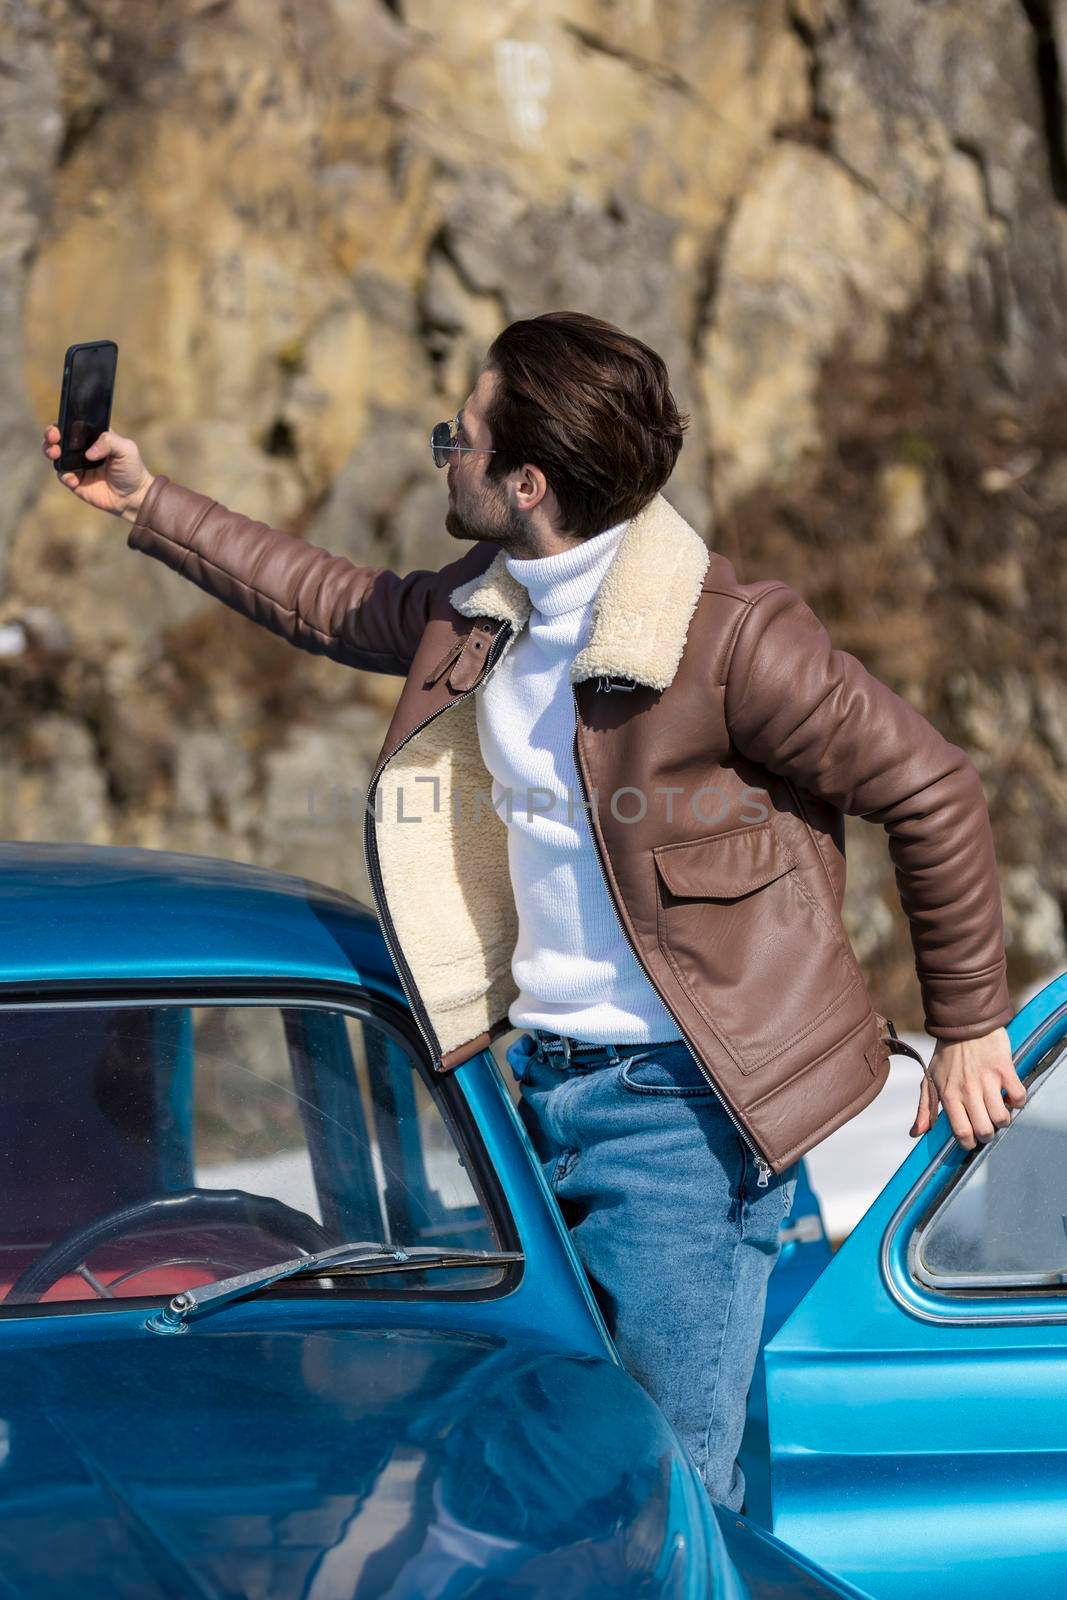 a man takes a selfie on the phone while standing near the car